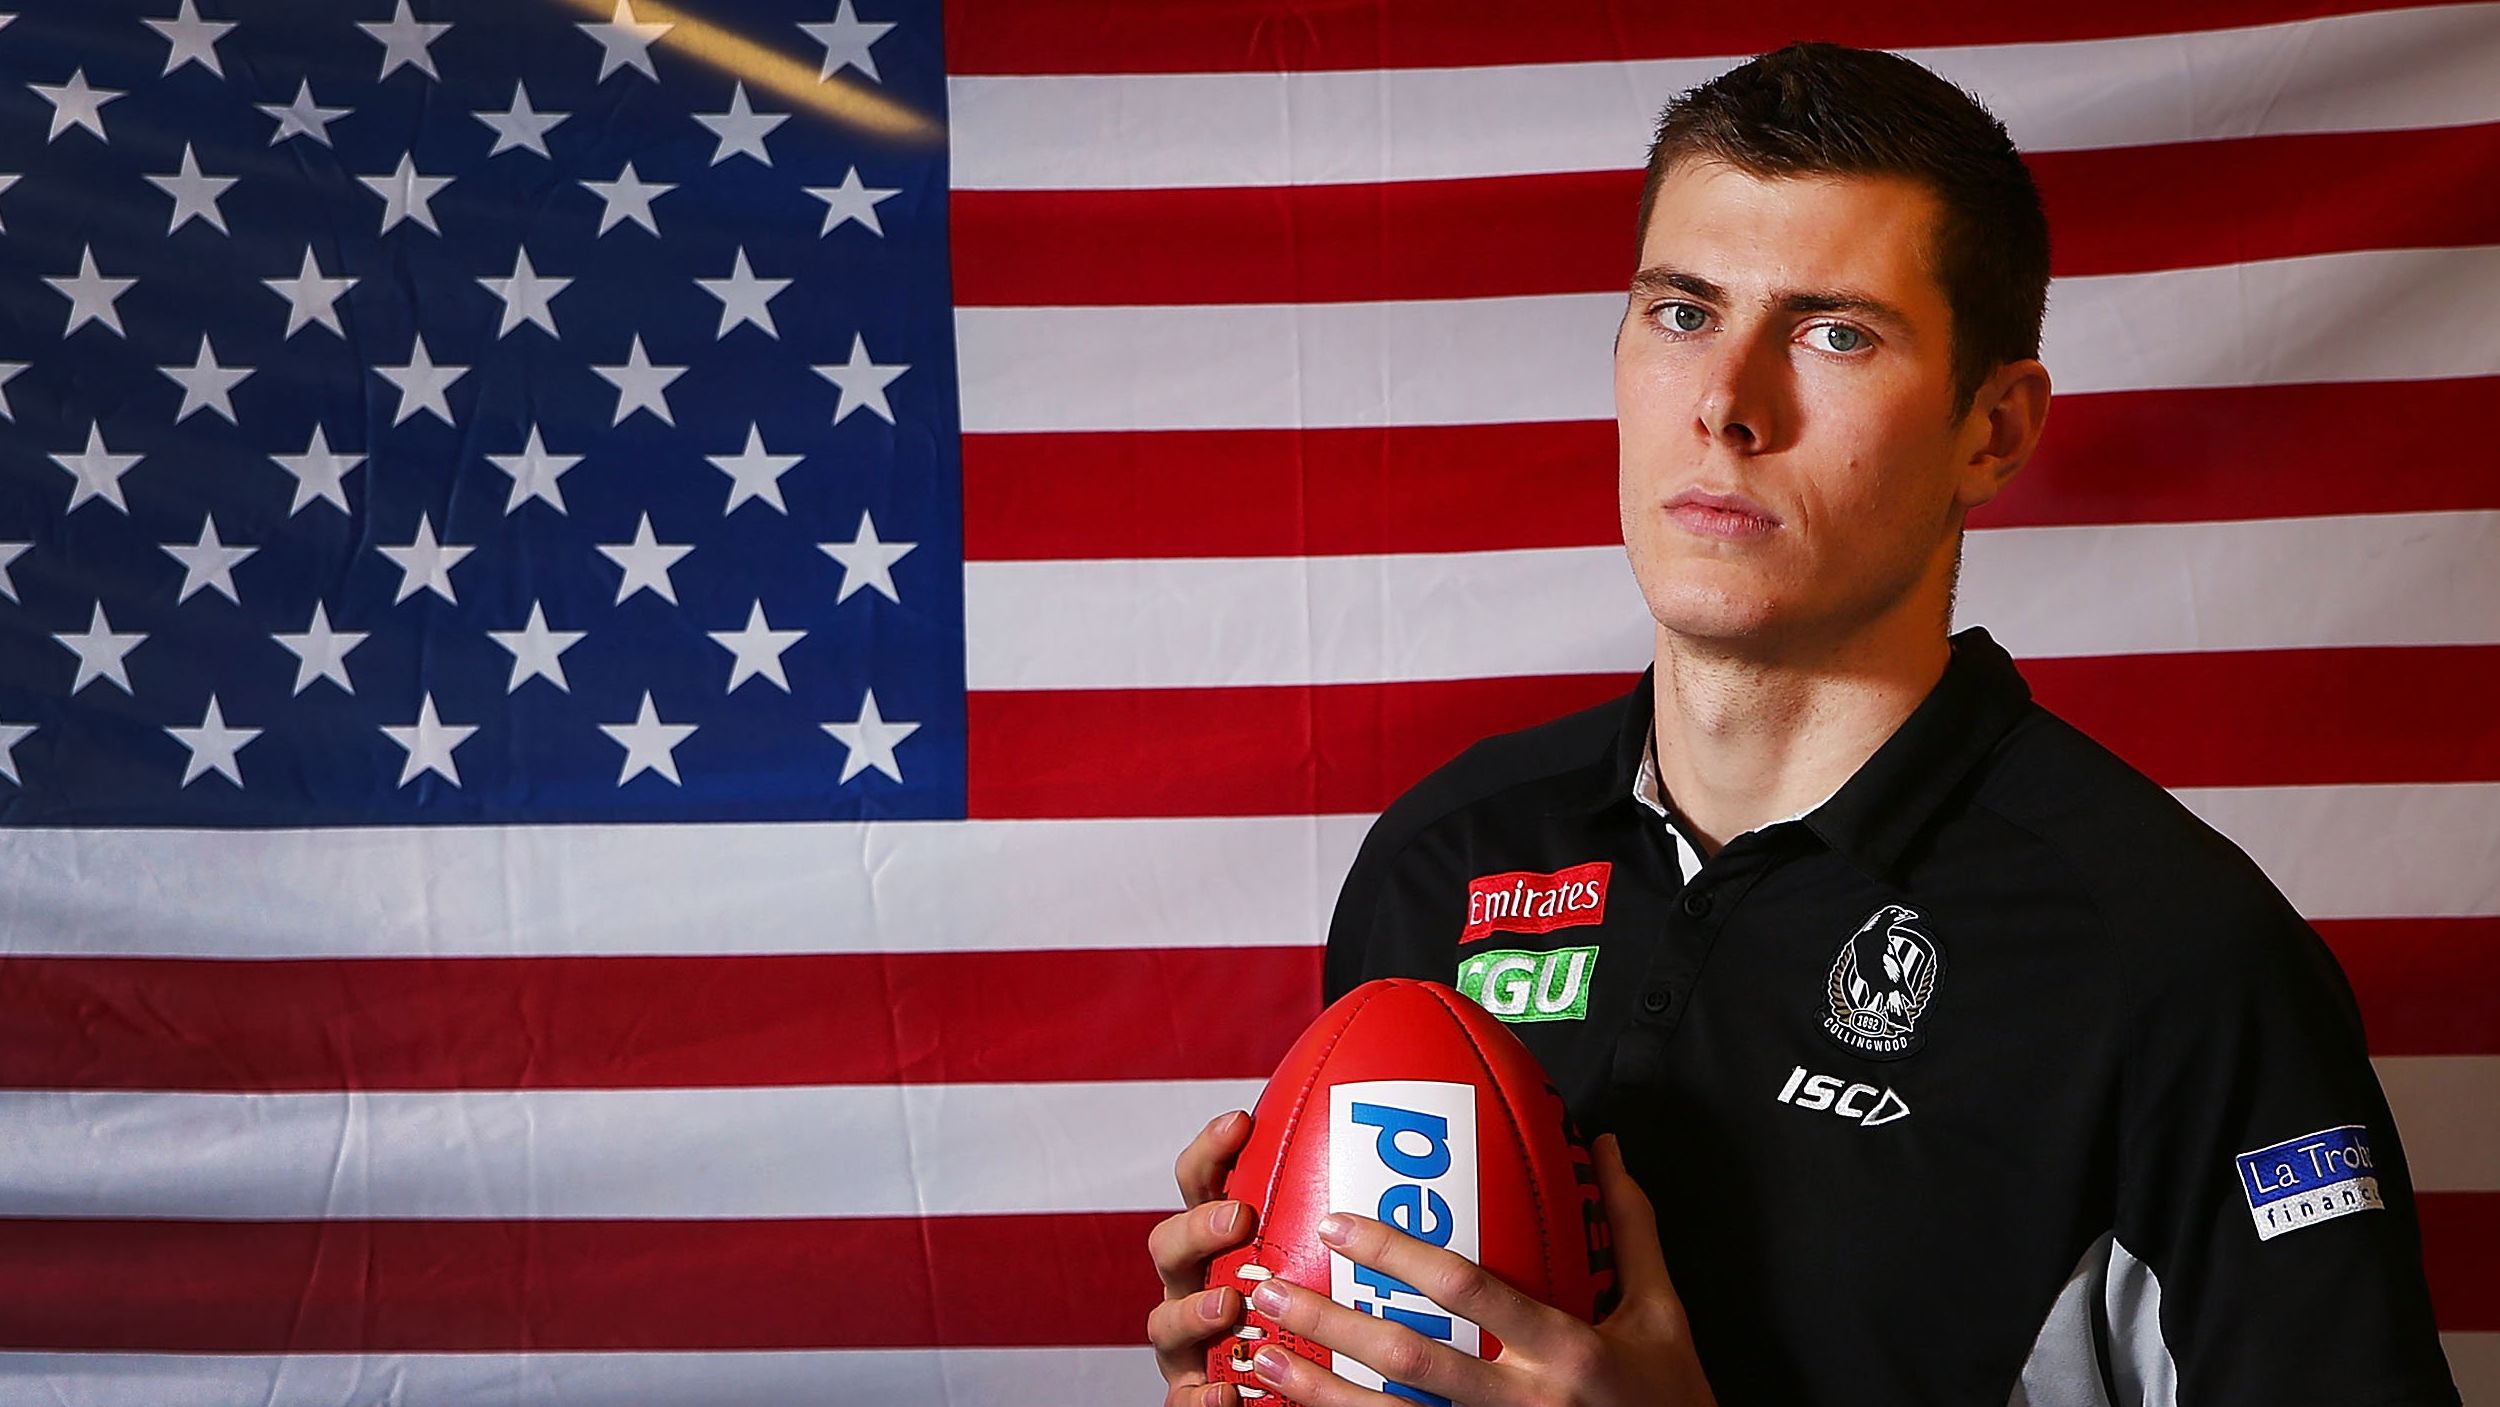 Mason Cox, the first American to play in the AFL, poses in front of his national flag.